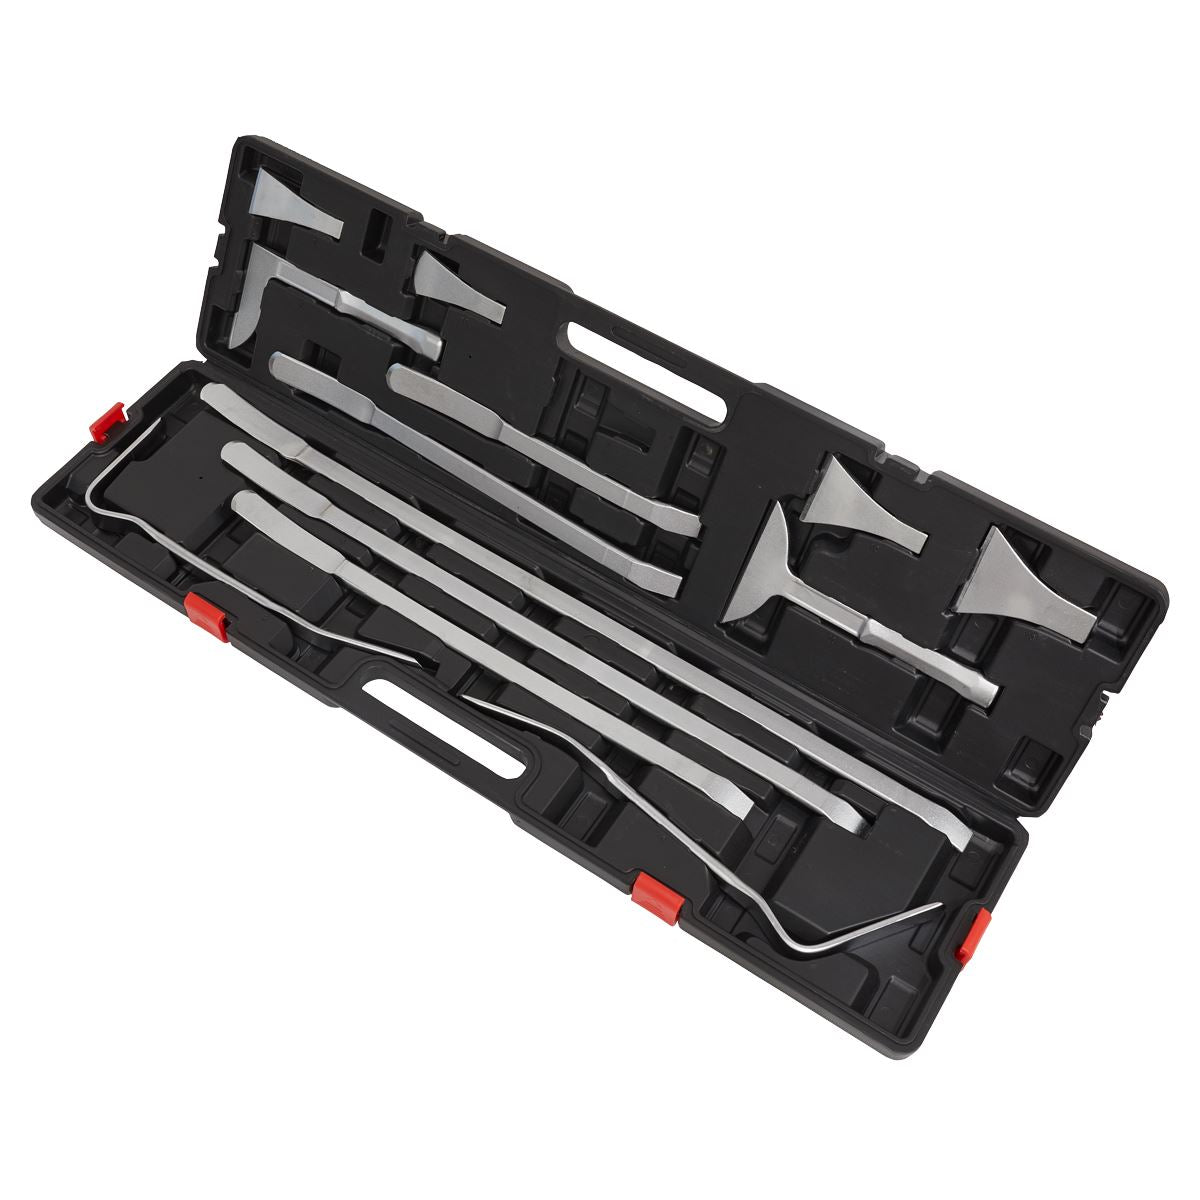 Sealey Body Panel Levering/Separating Tool Set 13pc